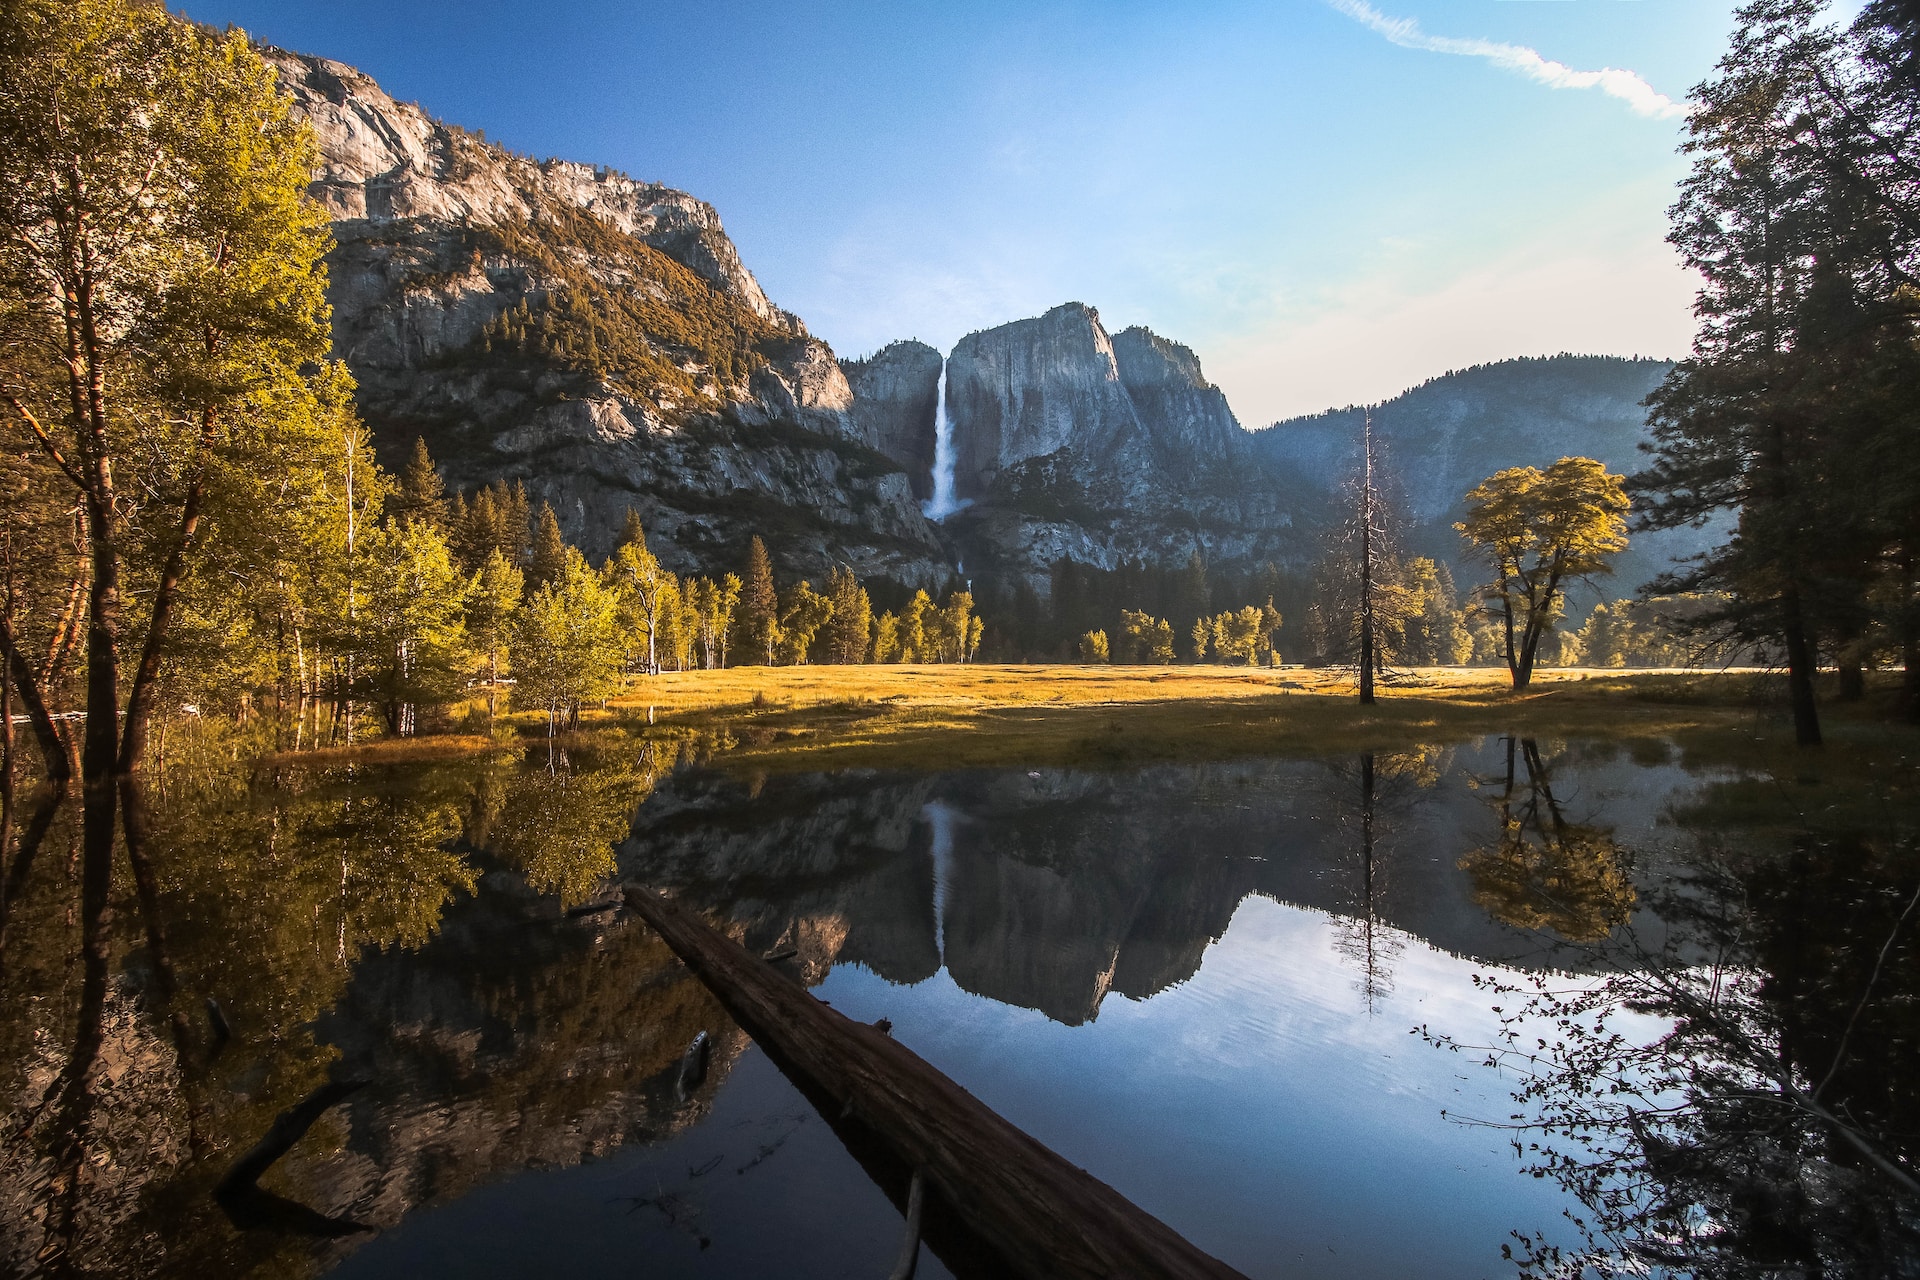 An image of Yosemite National Park. You can see the lake, with mountains, trees, and a waterfall in the reflection.